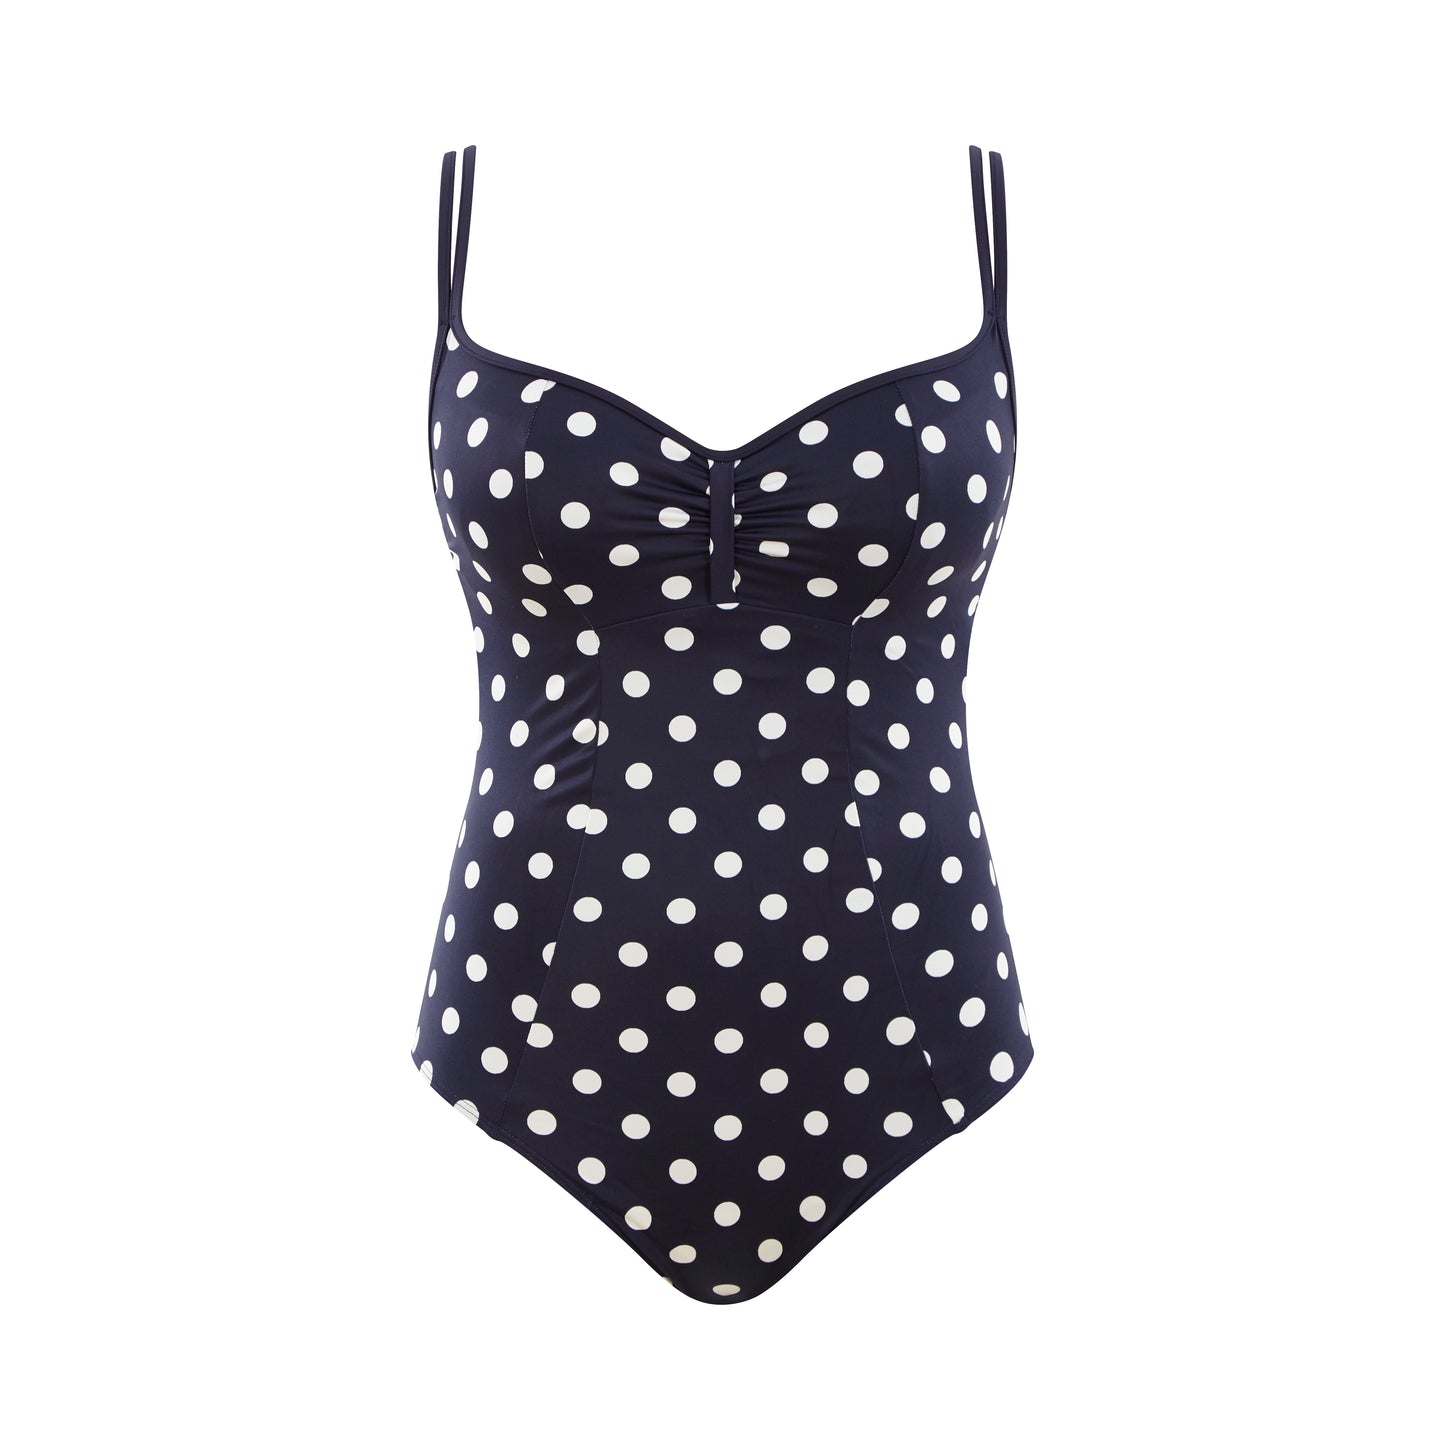 Panache Anya Riva One piece Swimsuit - up to a K cup!